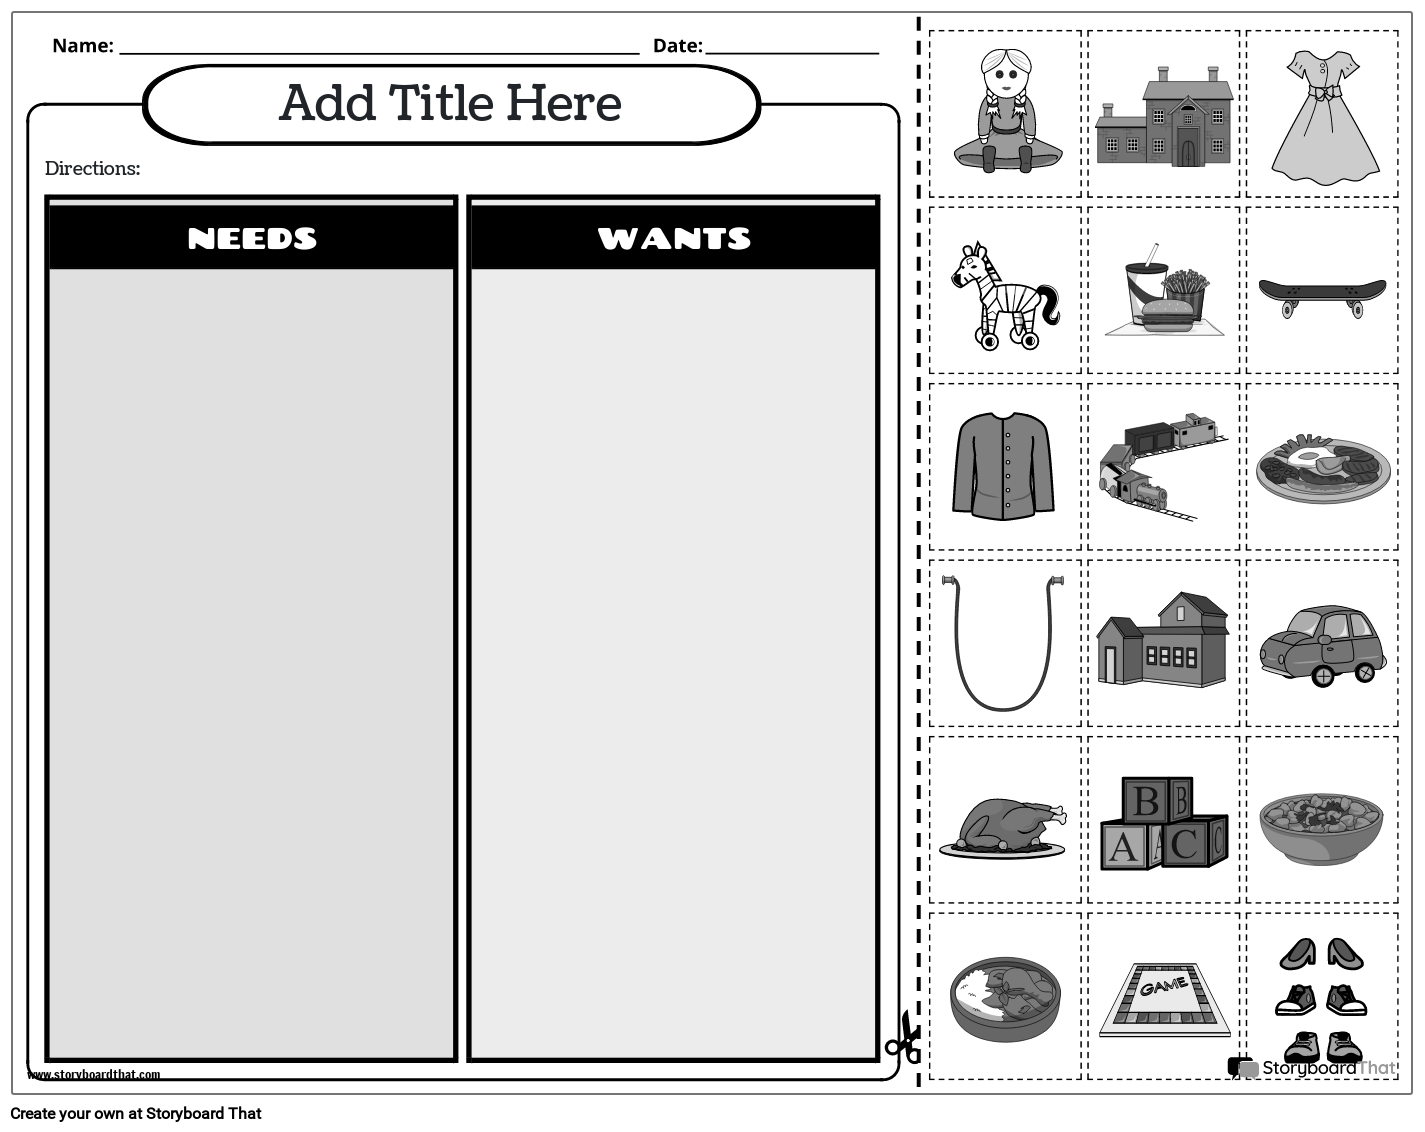 Needs and Wants Sort Cut and Paste - Economics Worksheet